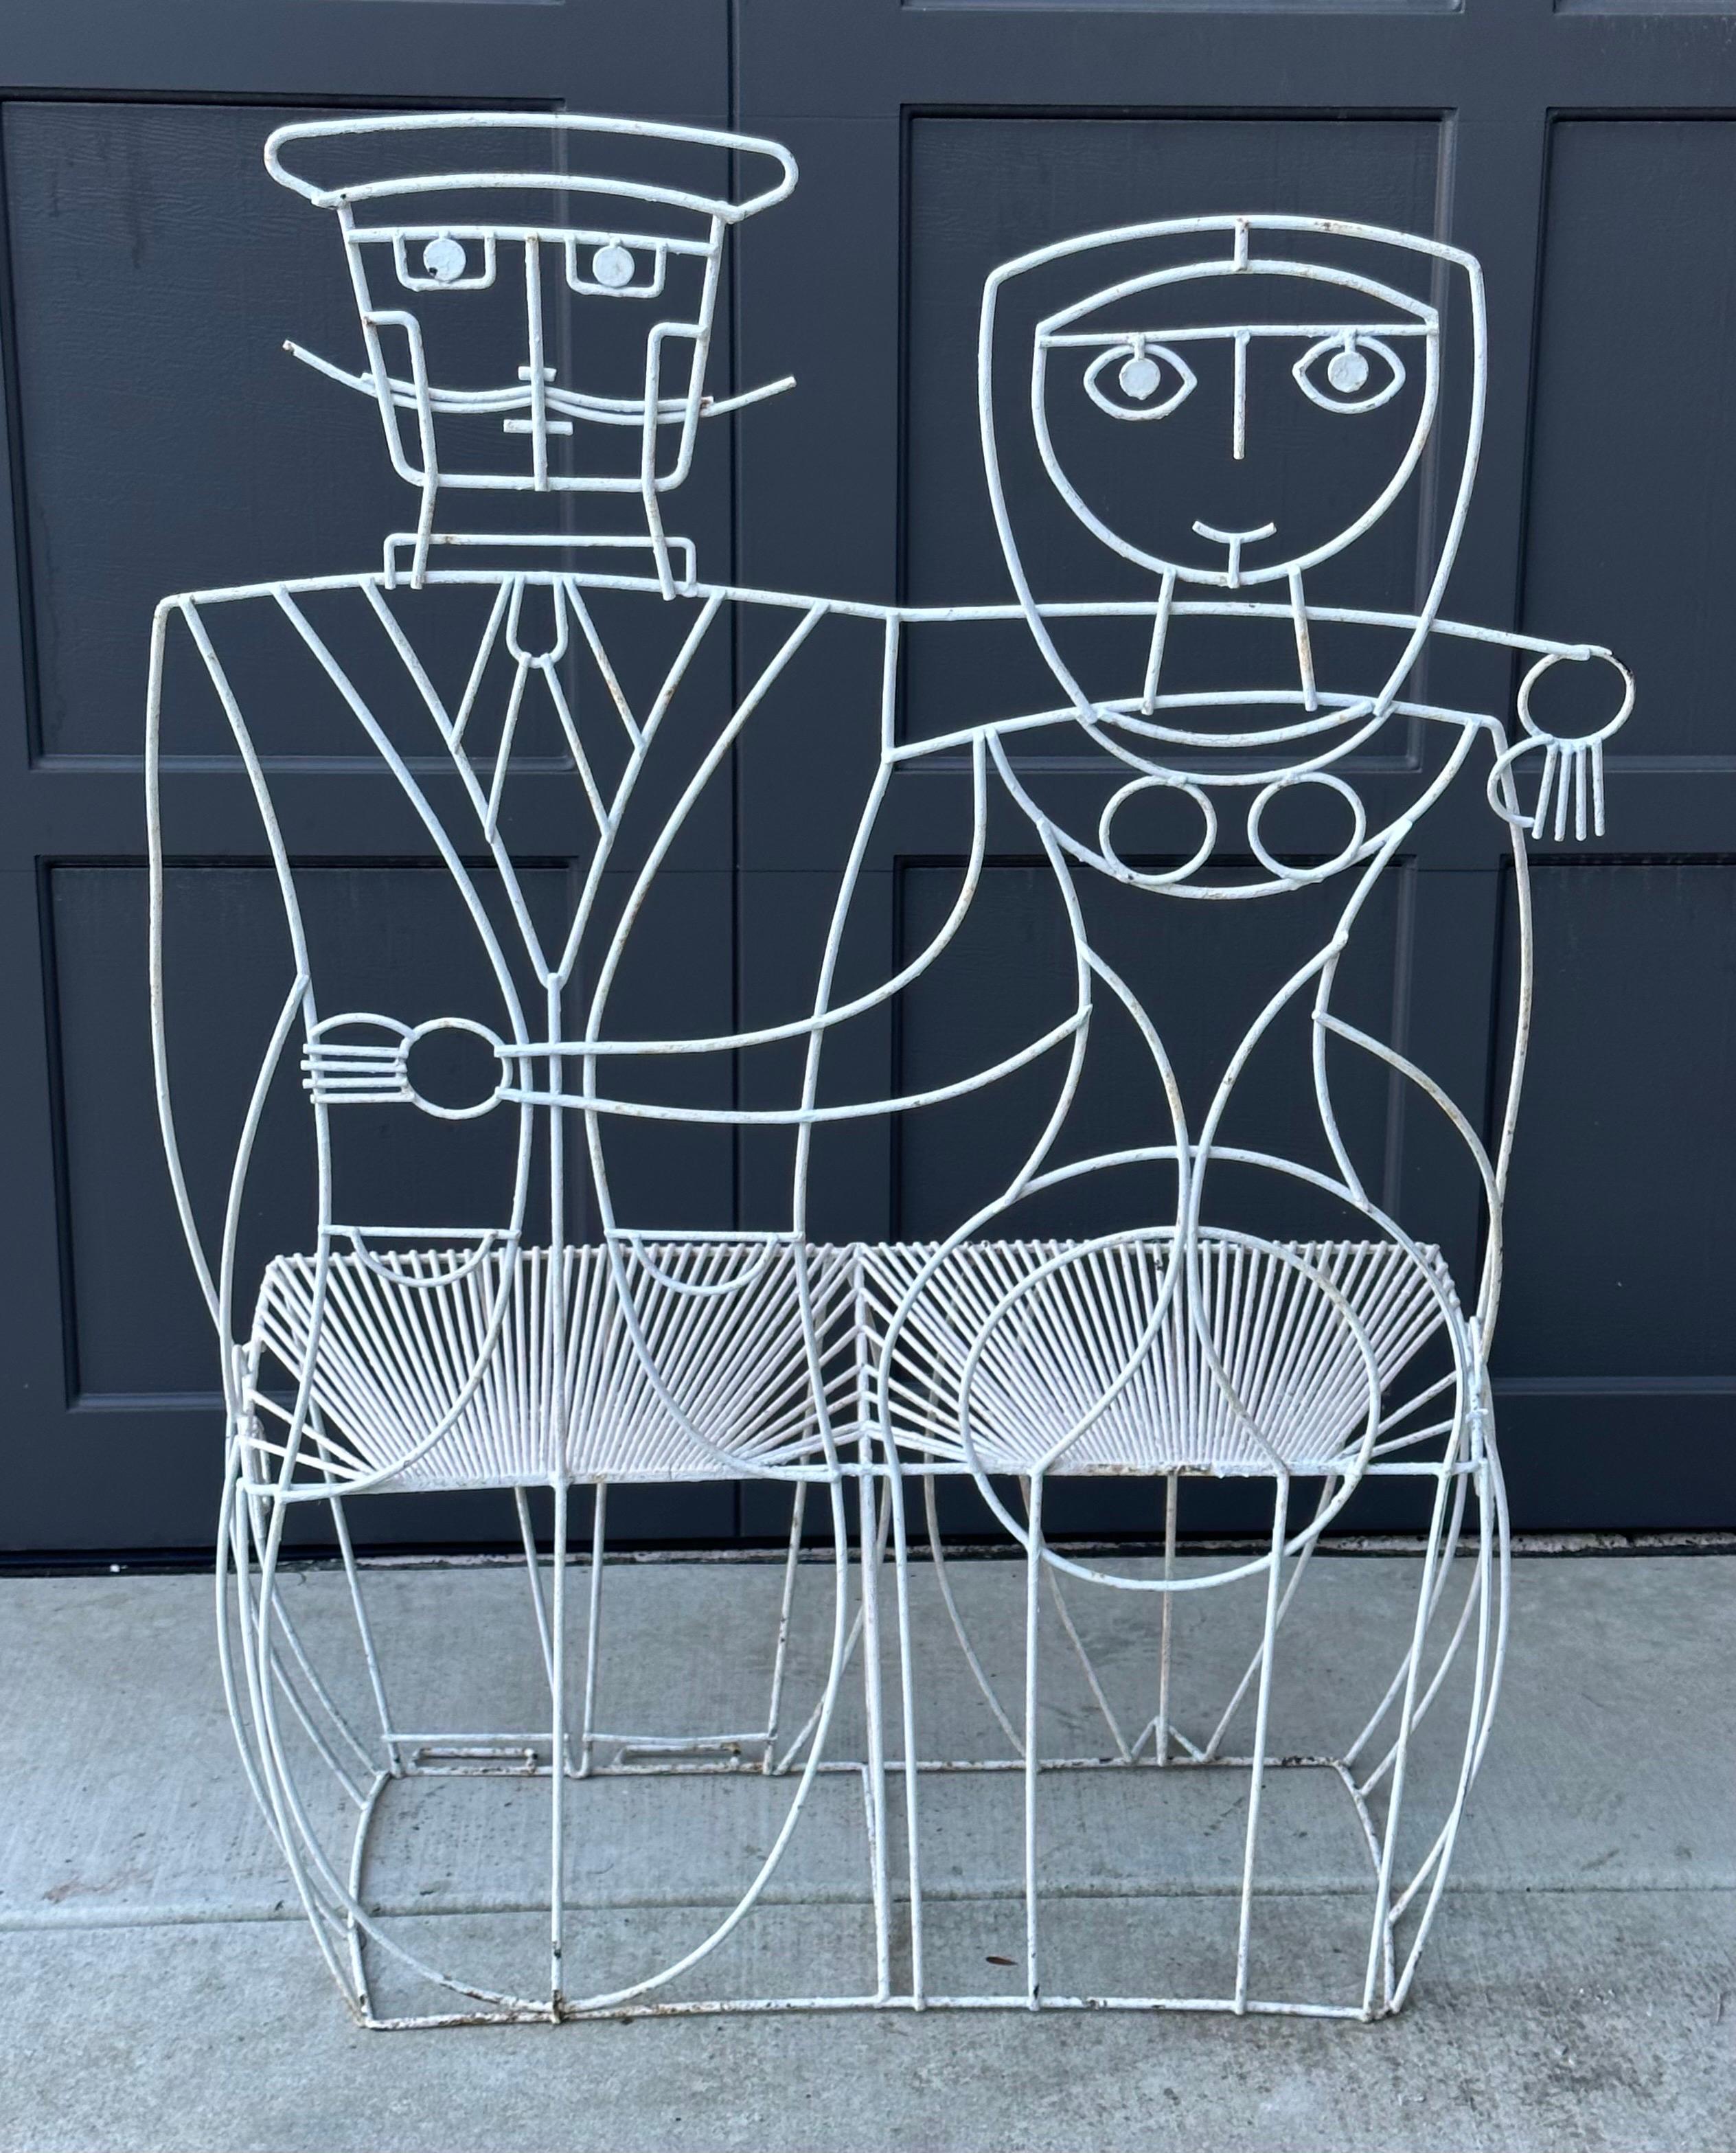 Whimsical Vintage Man & Woman Metal Wire Bench by John Risley For Sale 3